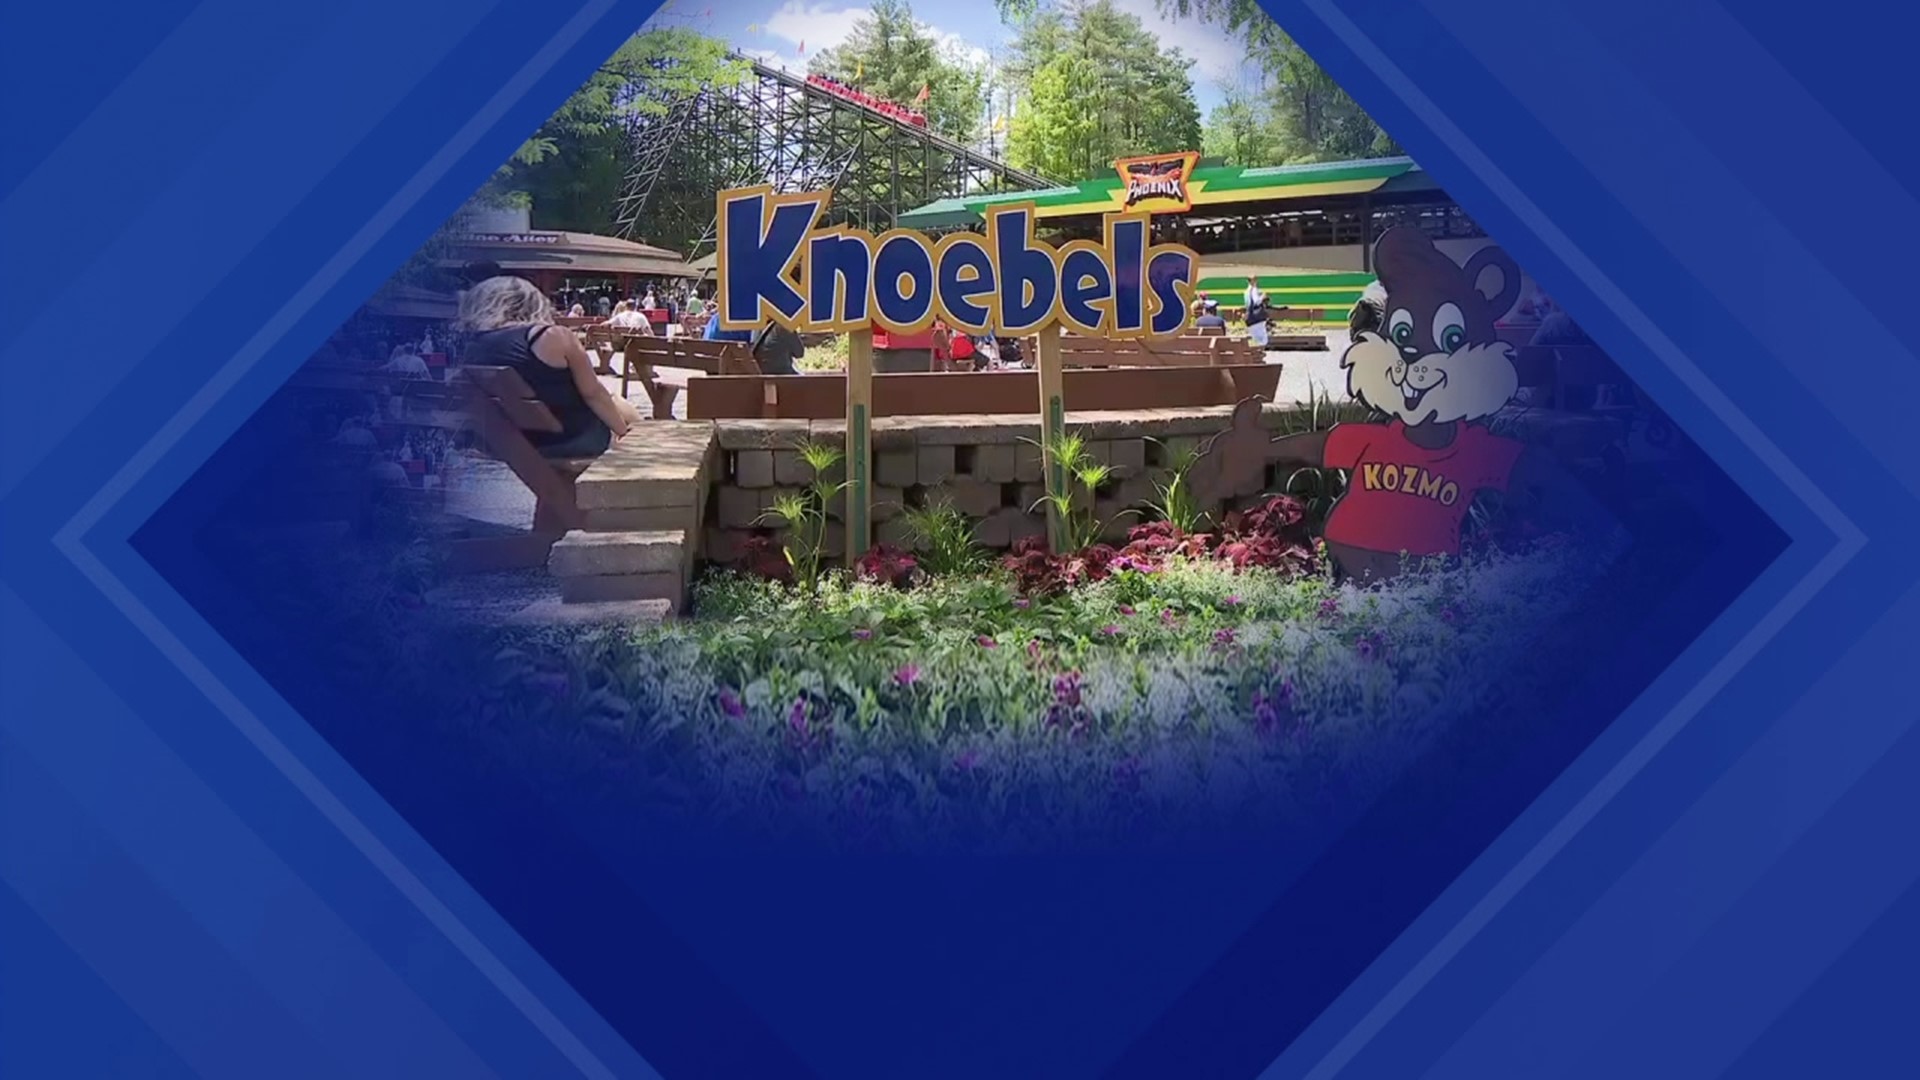 Summer is winding down and some students are preparing to head back to the classroom, leaving the thrills of the season behind. It means adjustments at Knoebels.